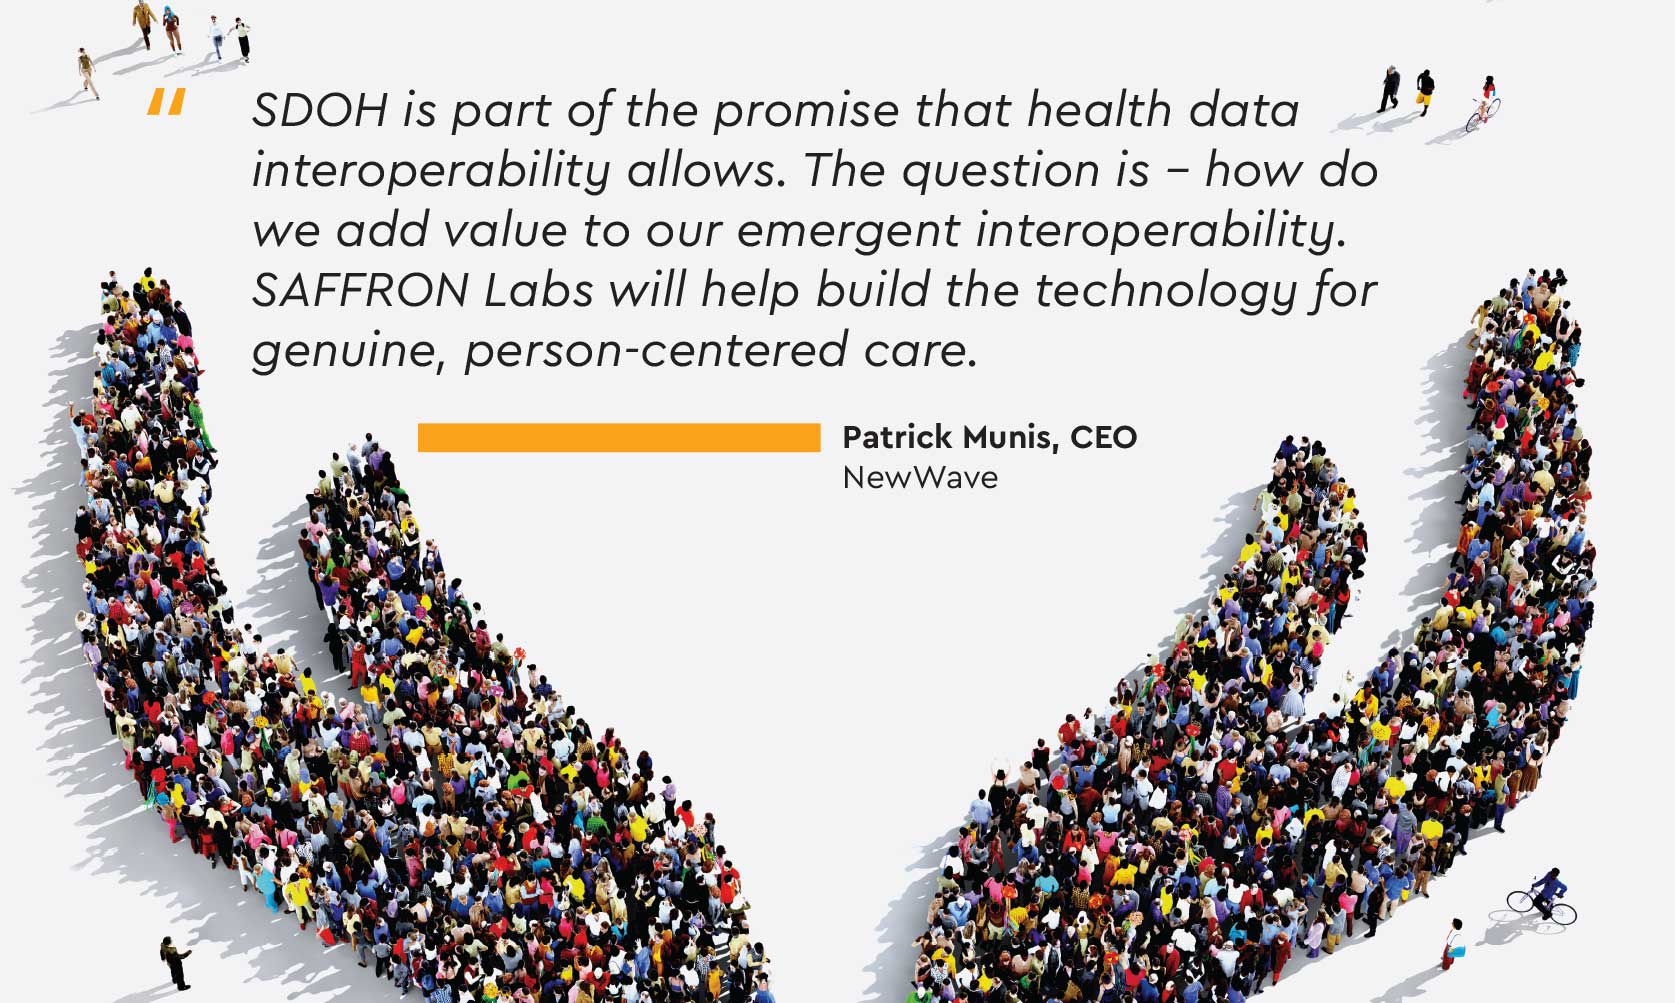 SDOH is part of the promise that health data interoperability allows. The question is – how do we add value to our emergent interoperability. SAFFRON Labs will help build the technology for genuine, person-centered care. Patrick Munis, CEO NewWave